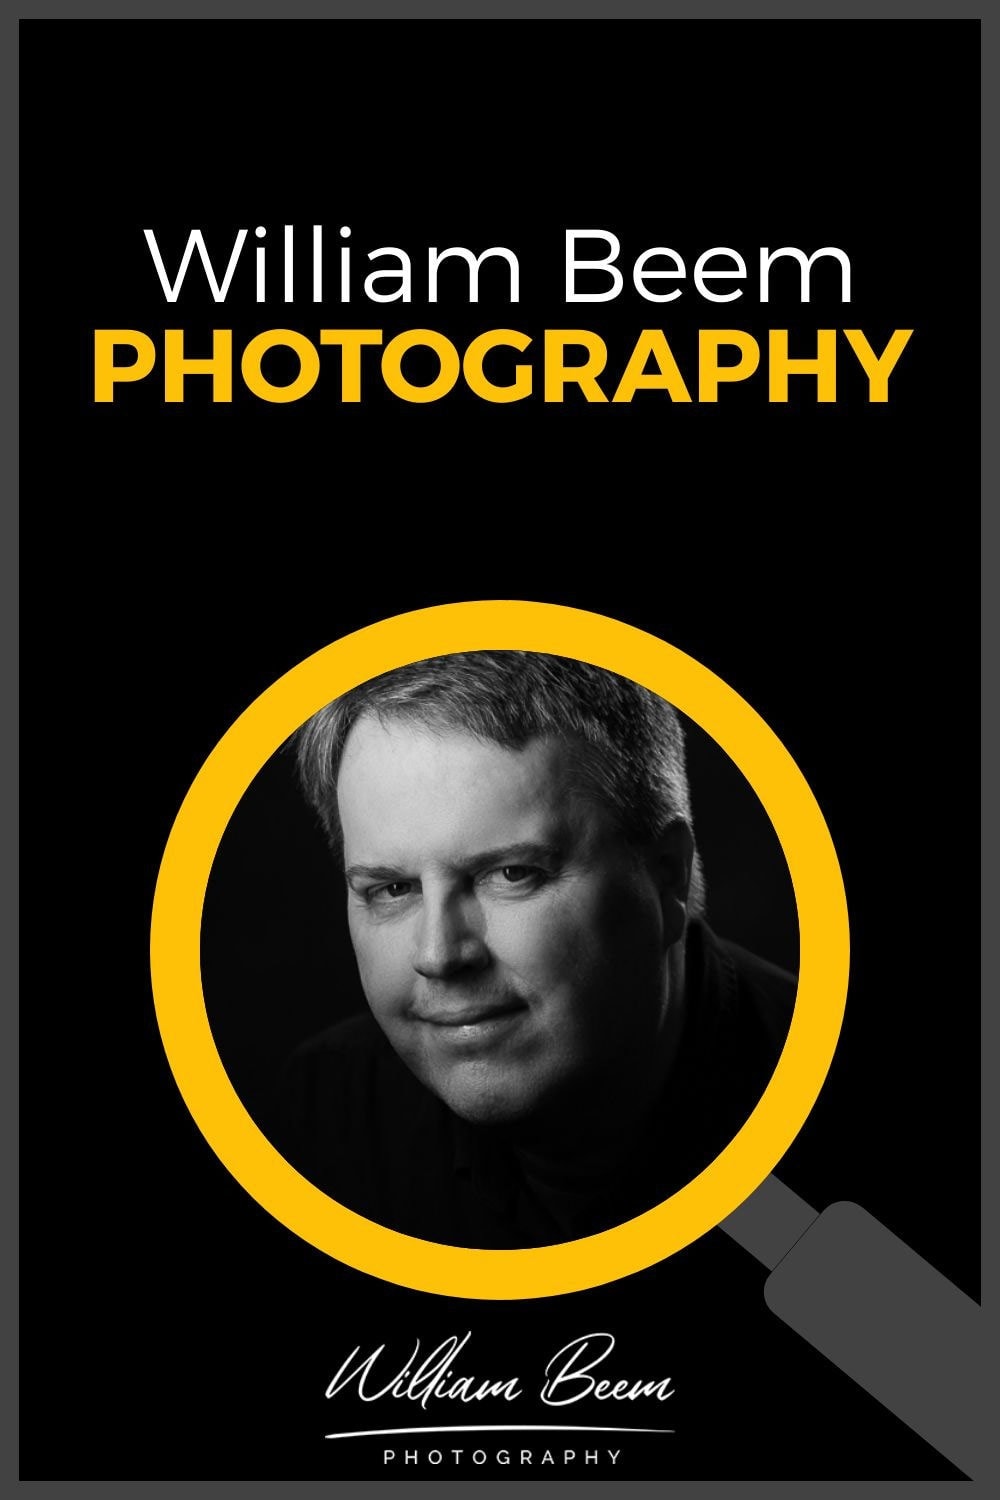 William Beem Photography and Visual Storytelling